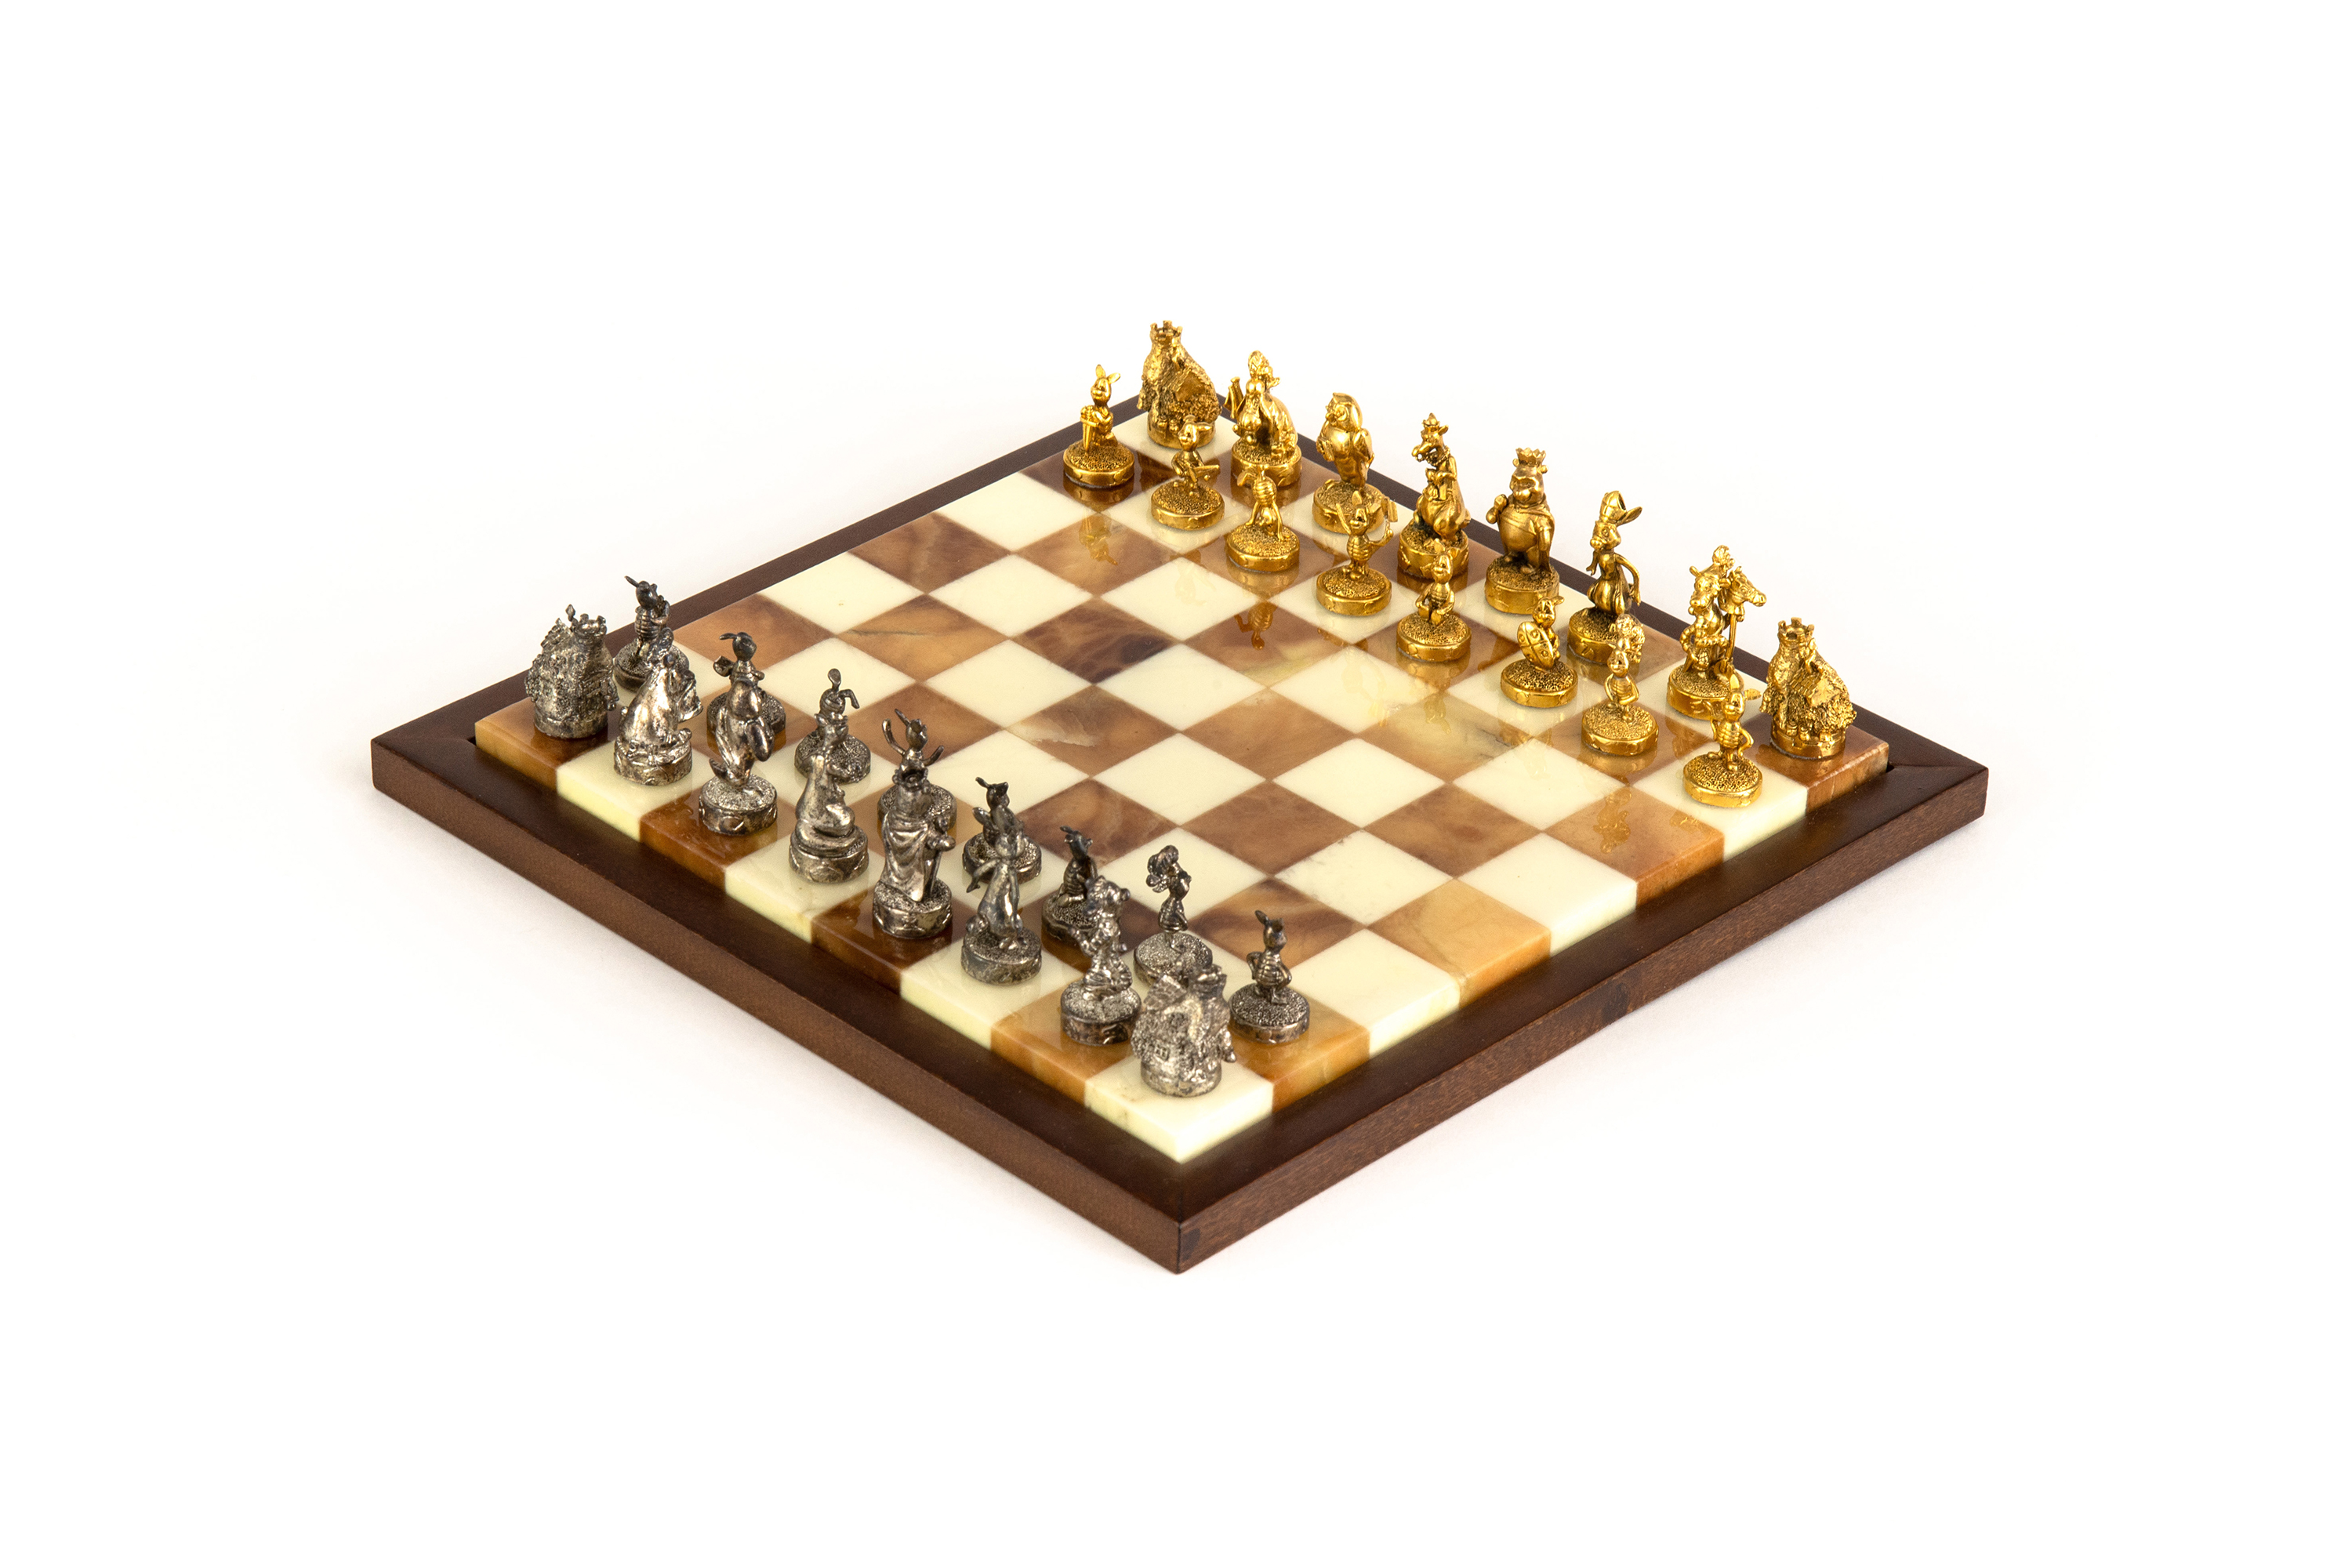 STLCC Vinyl Roll Up Chess Board – World Chess Hall of Fame